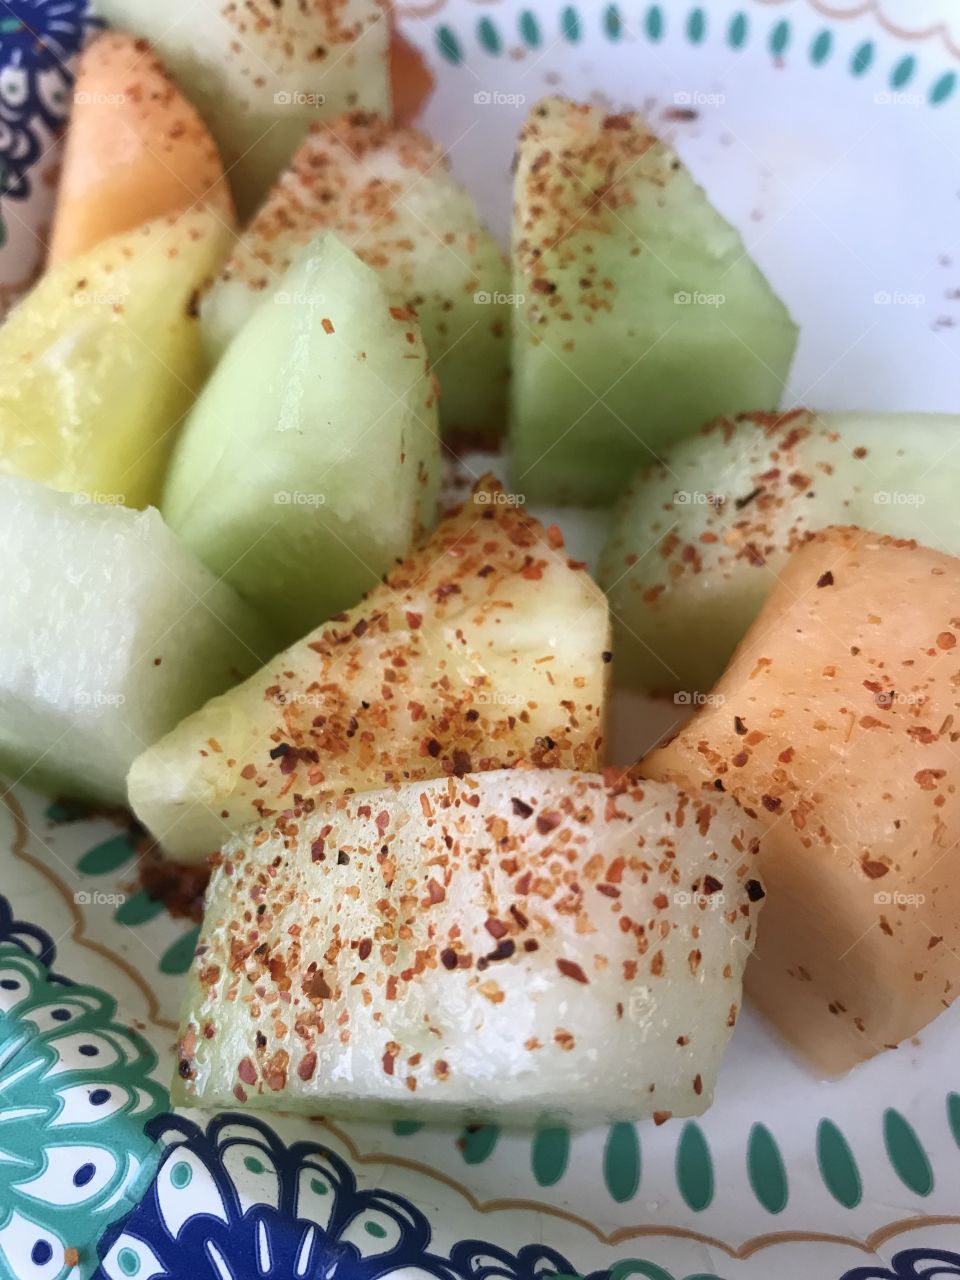 “Tajín” always makes everything much tastier. Fresh fruit and Tajín is a perfect combination and your body thinks you for such deliciousness. Enjoy. 